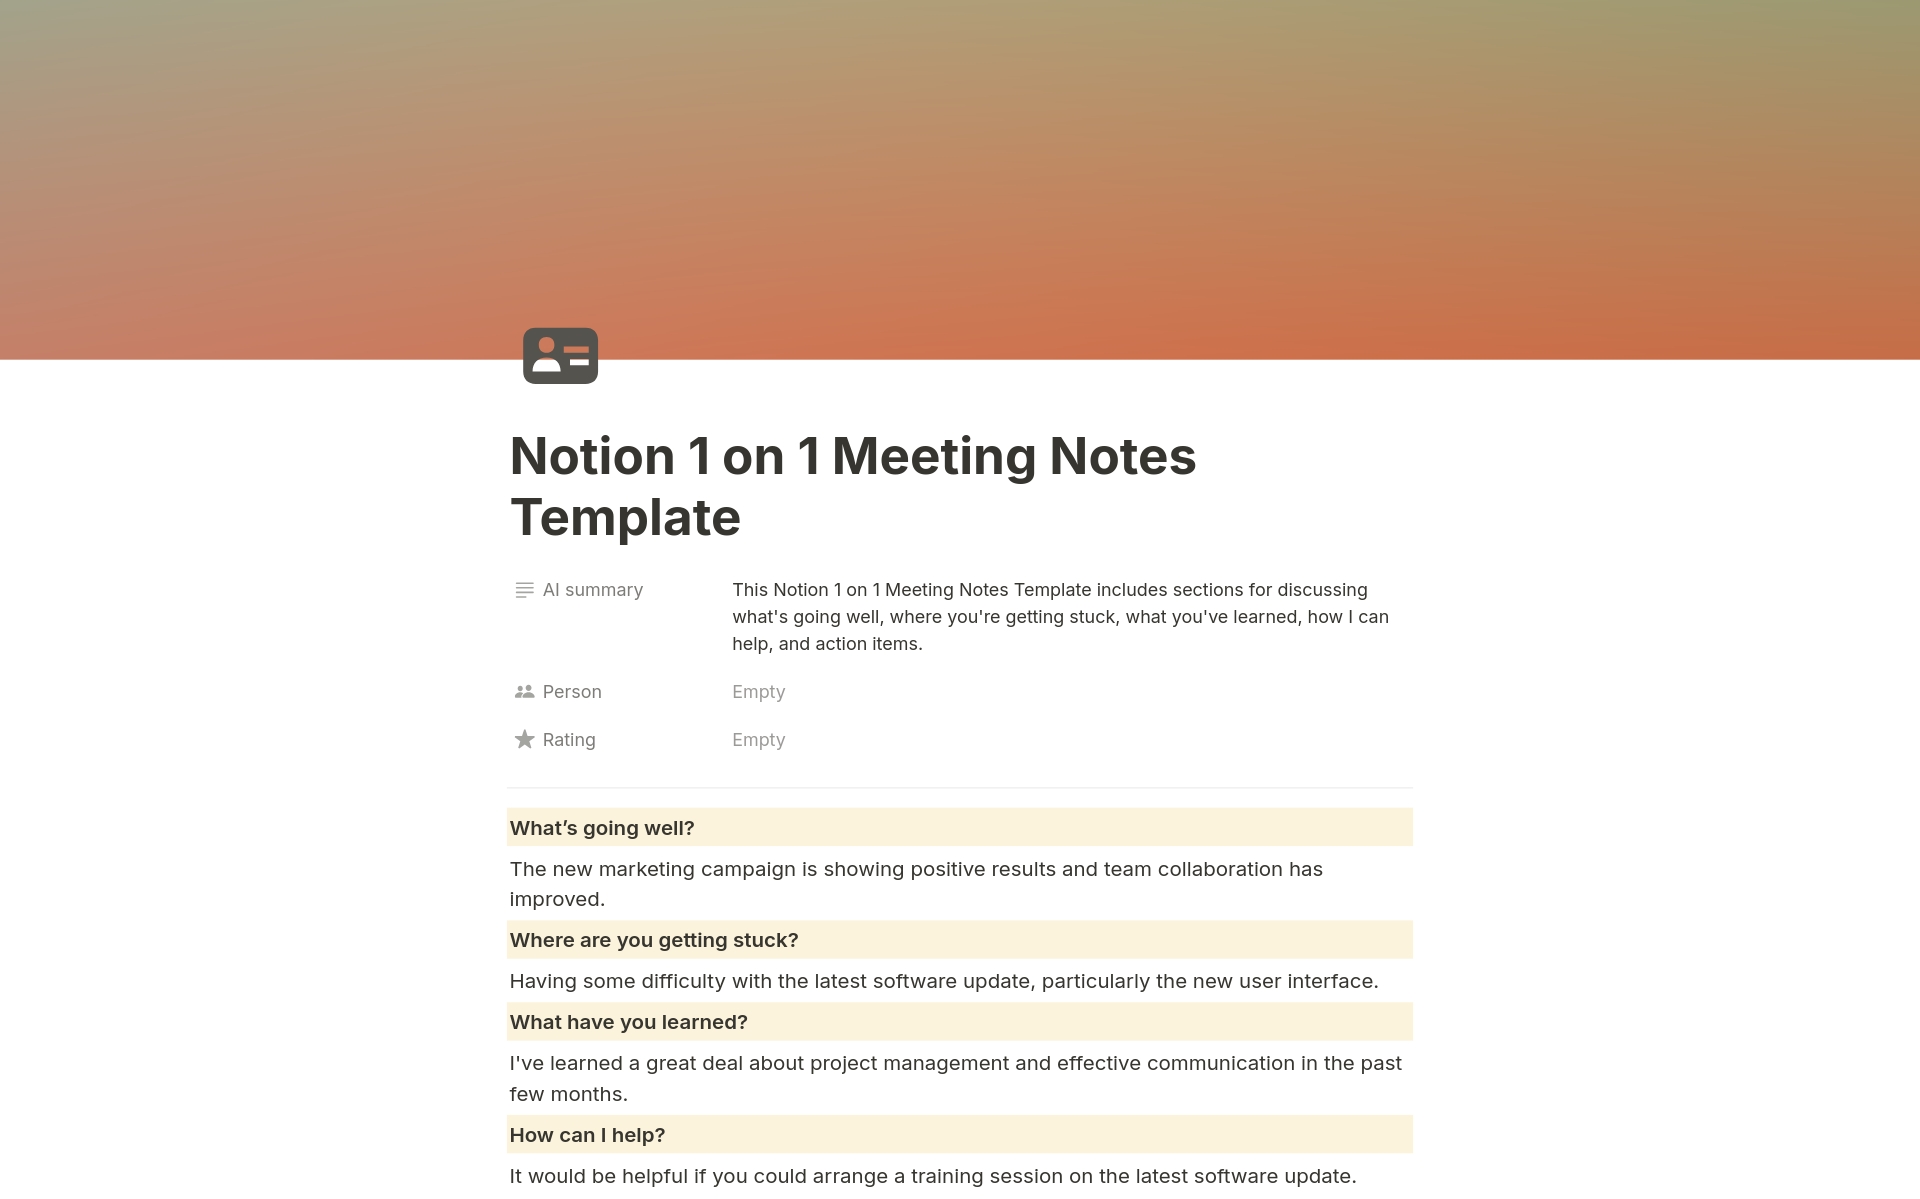 A template preview for 1 on 1 Meeting Notes